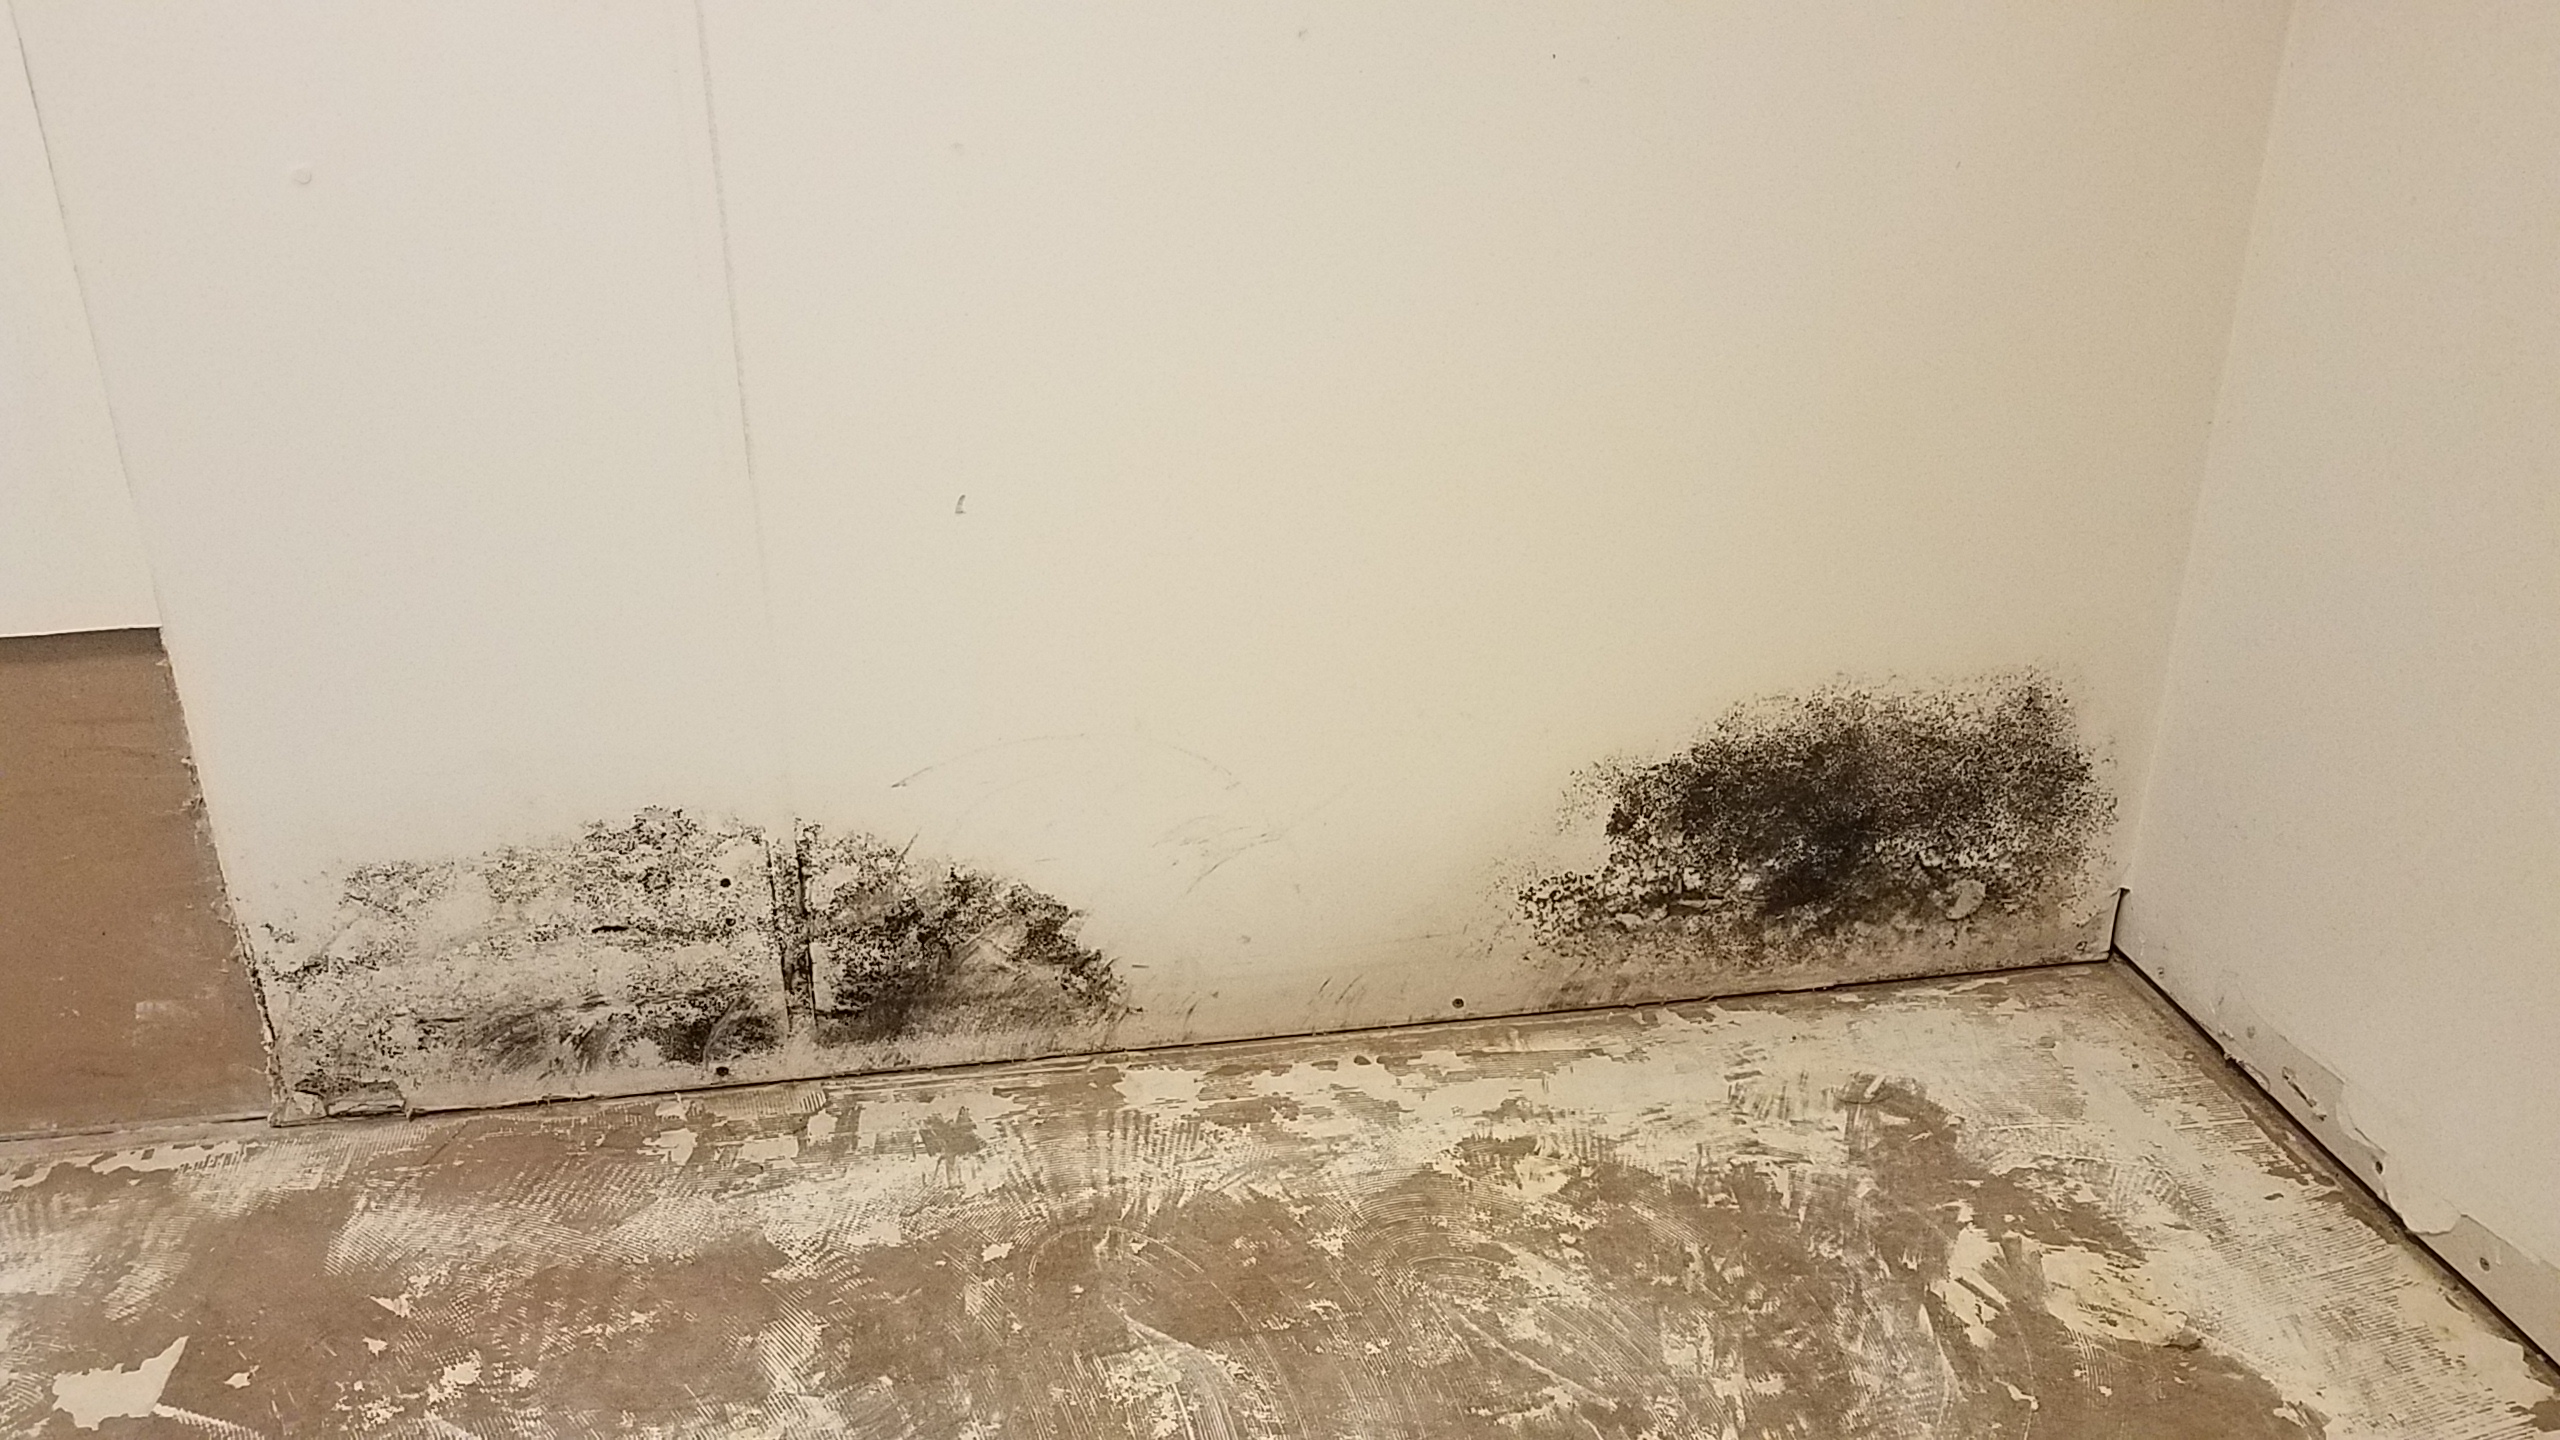 Got Mold?  We can help.  We can make your mold damage "Like it never even happened."